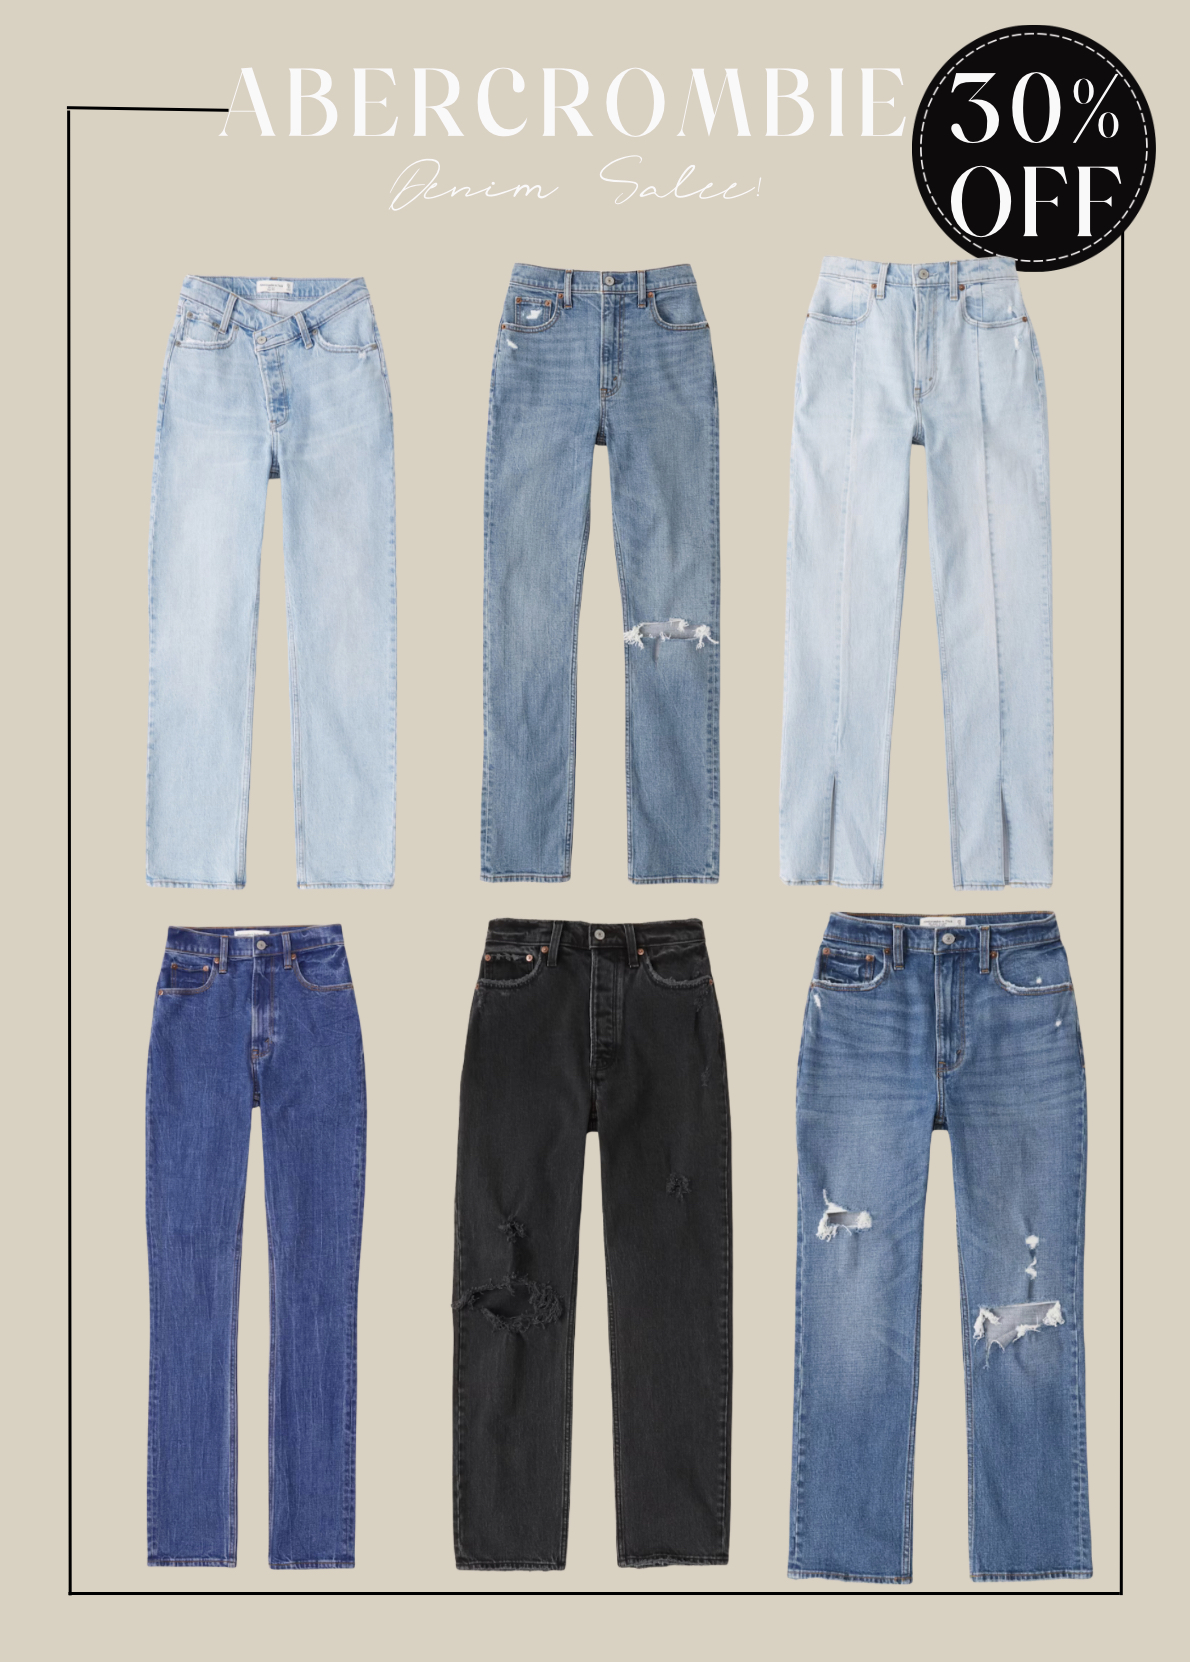 Abercrombie jeans on sale. Take 30% off select styles. 